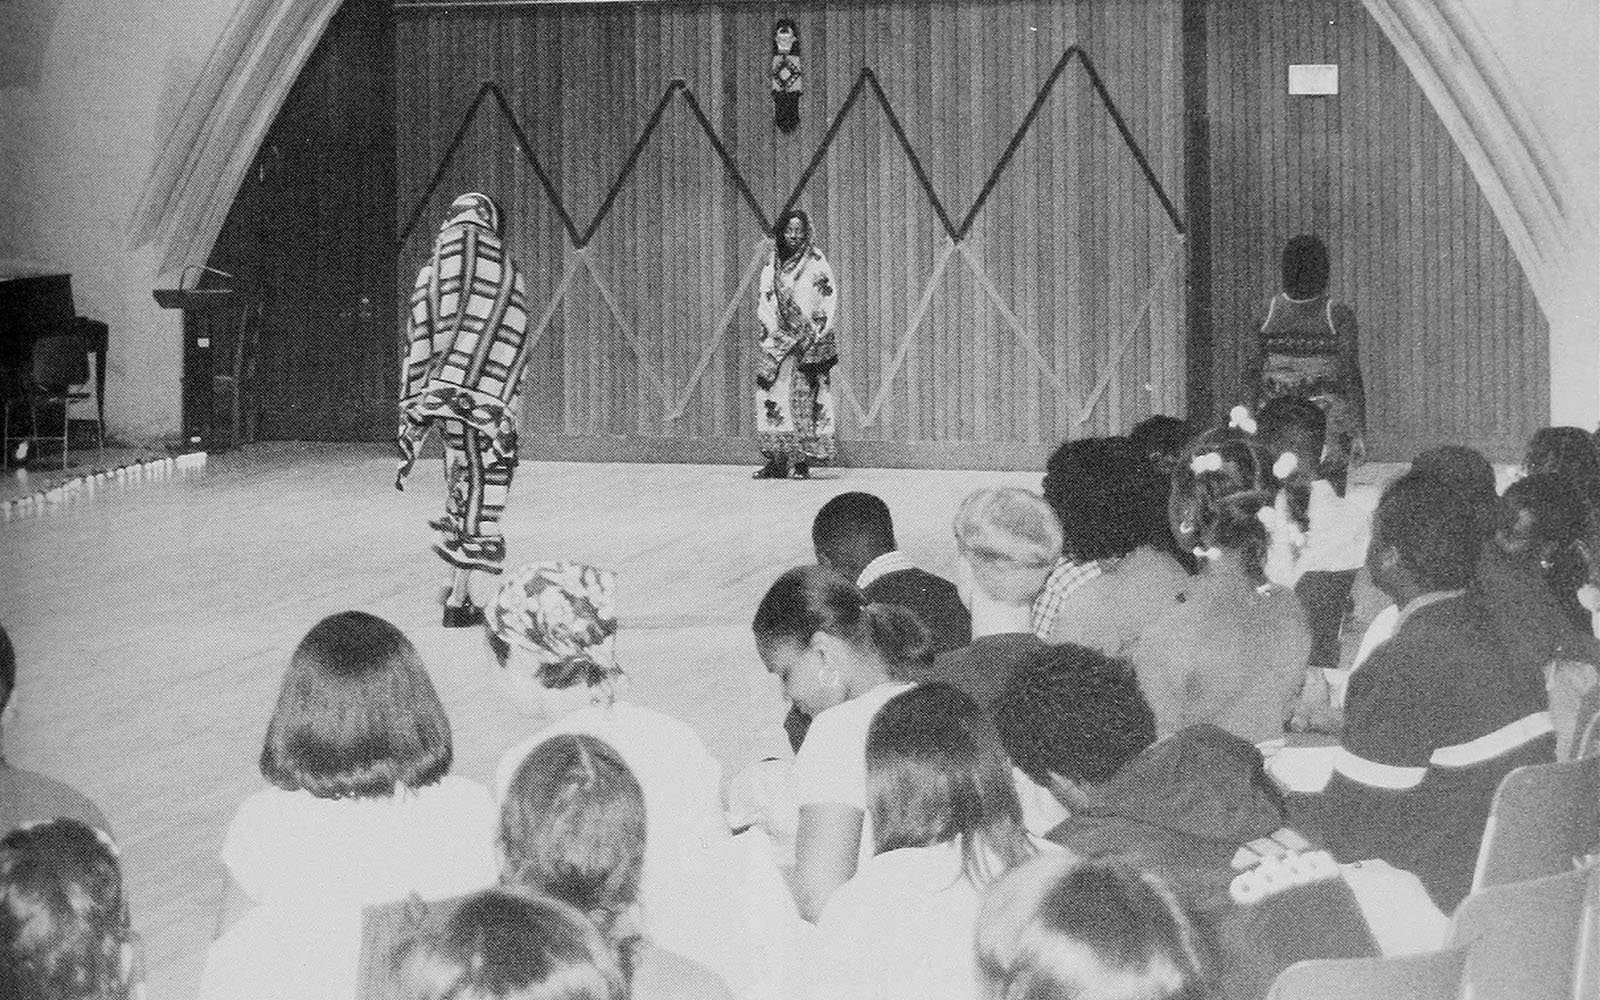 Members of SASA perform in a fashion show as part of a presentation of African culture, 1999.